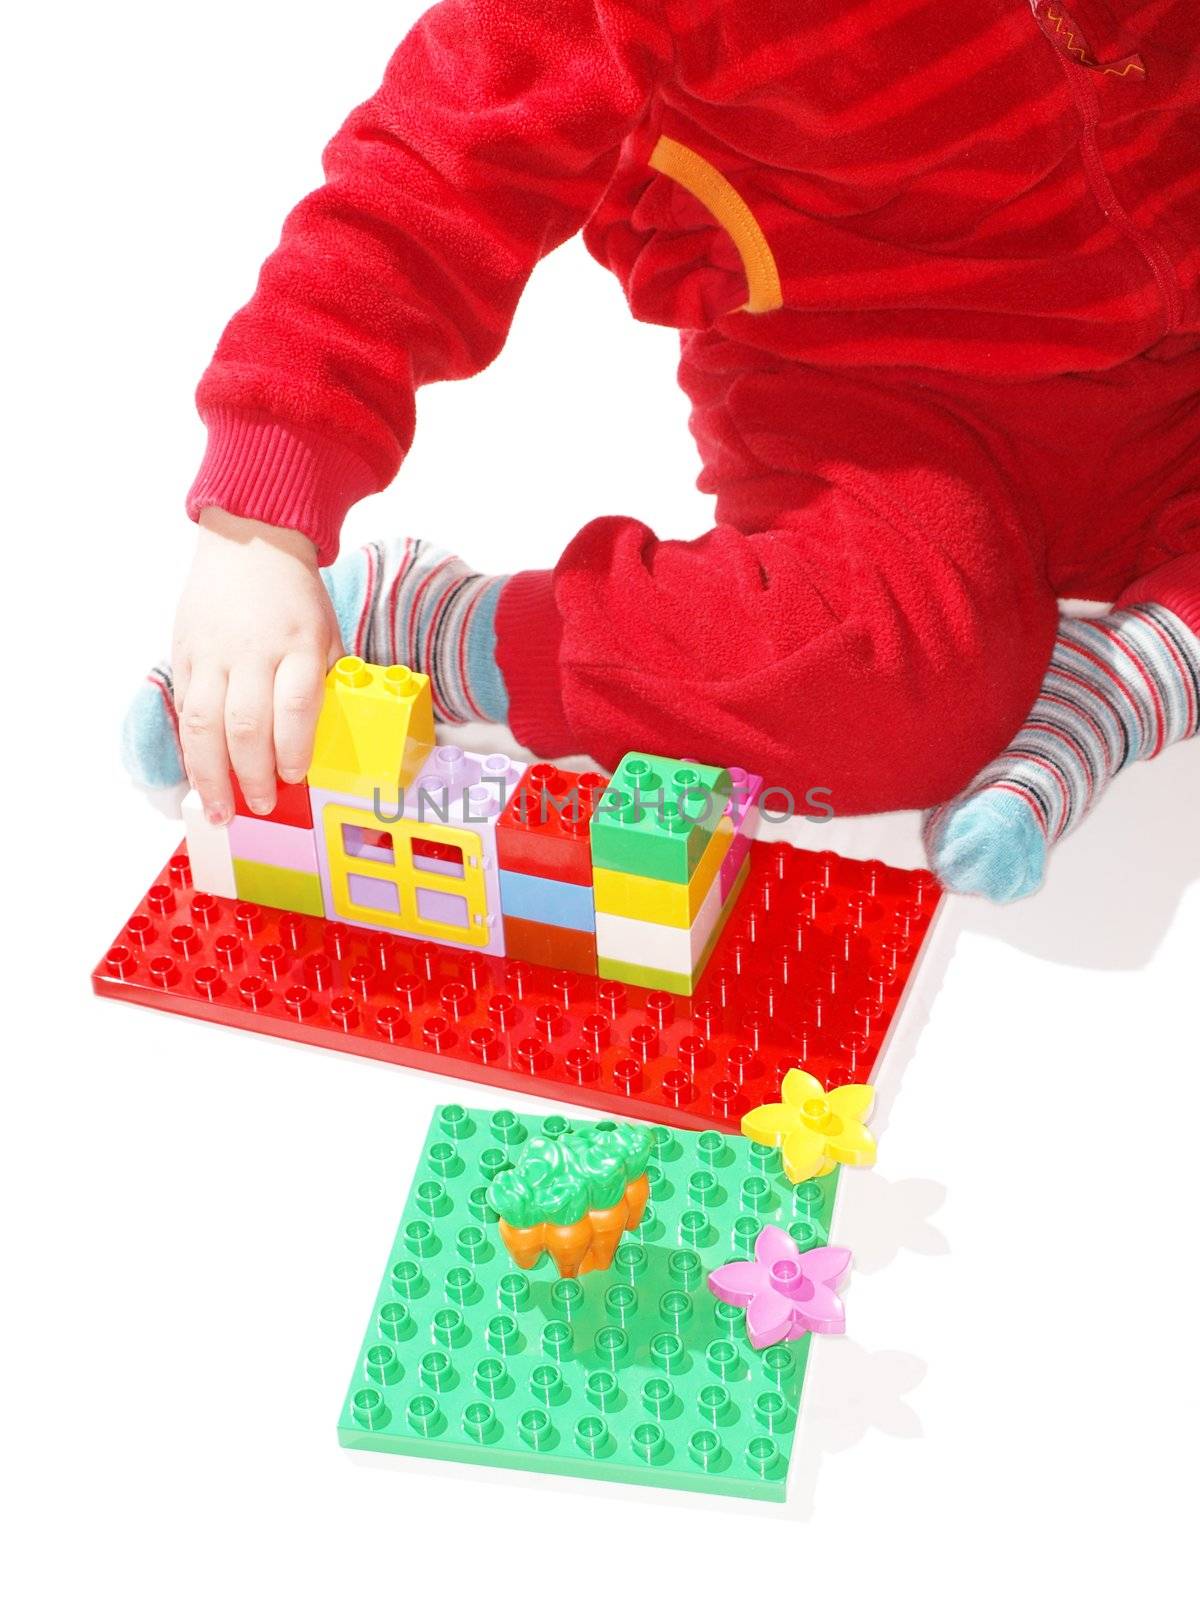 Kid in red, playing with colorful toys by Arvebettum